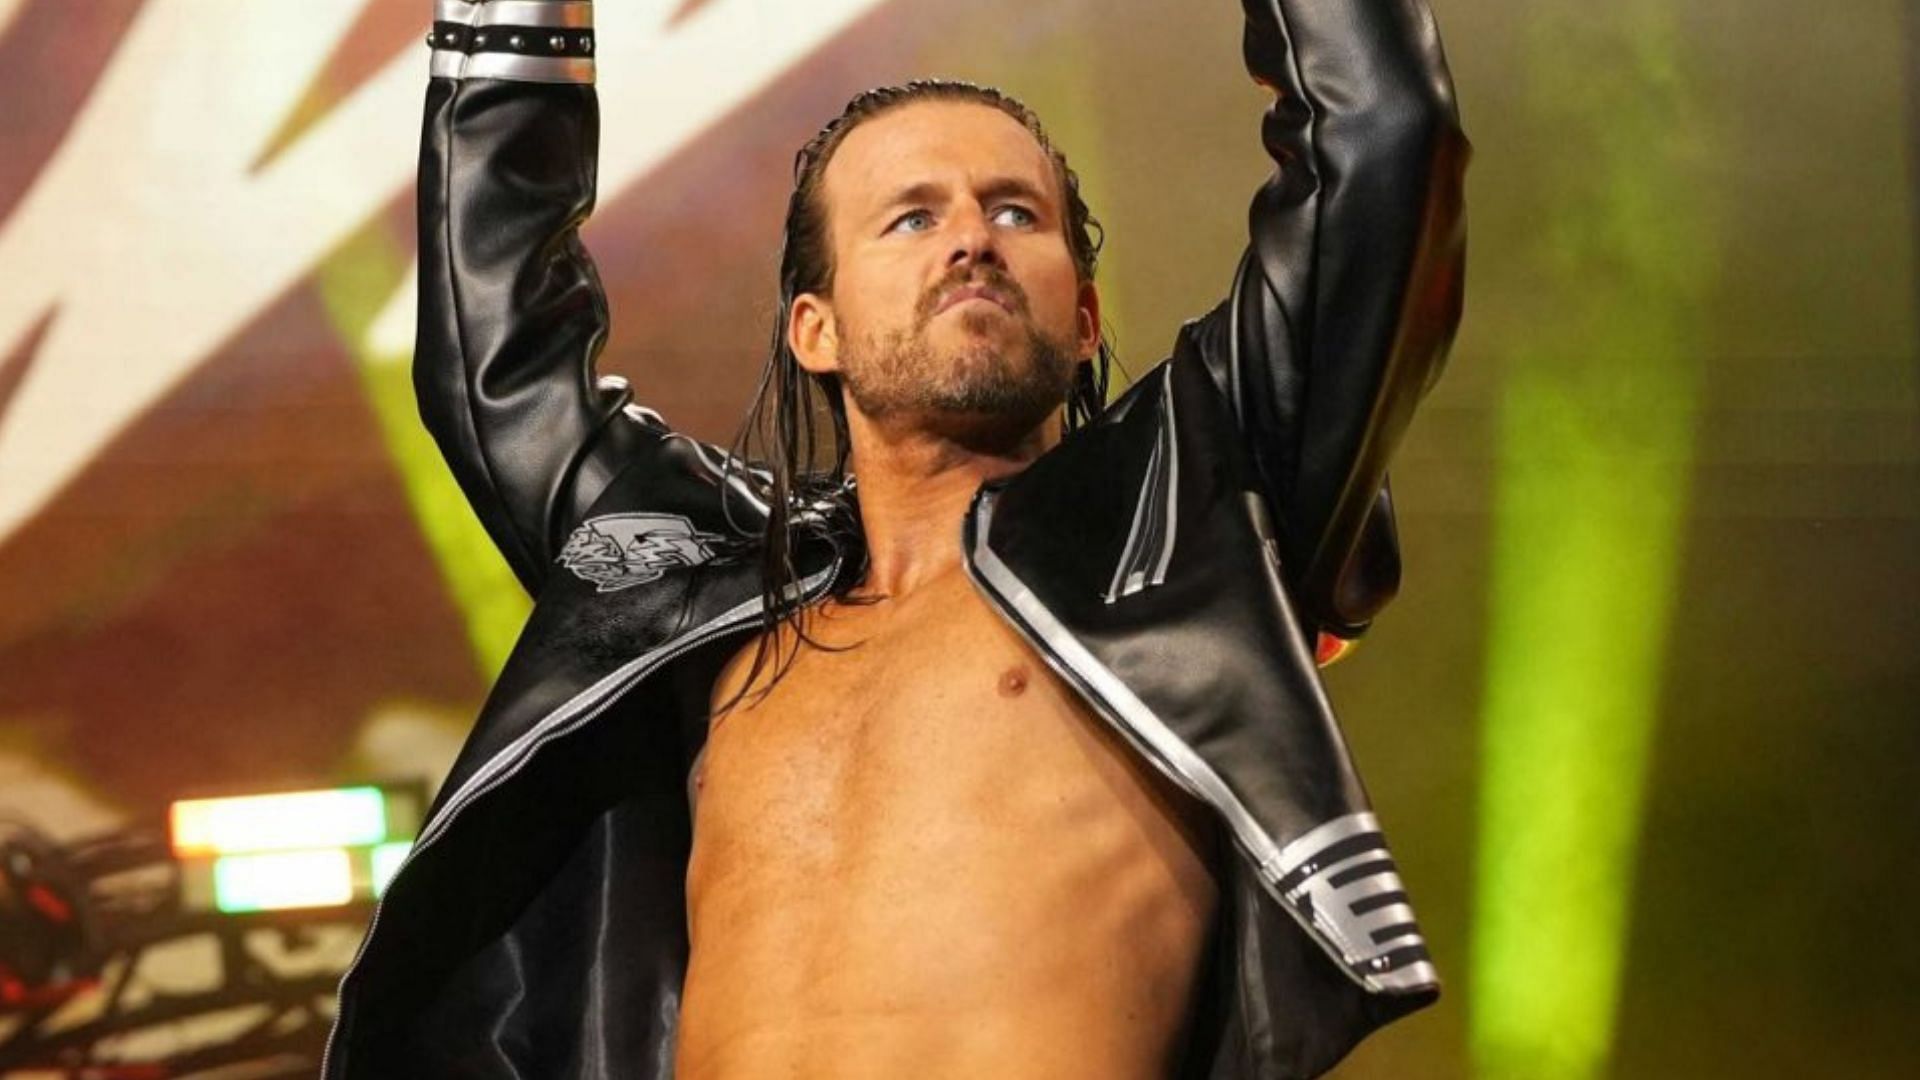 AEW star Adam Cole reacts to picture of lookalike surfacing